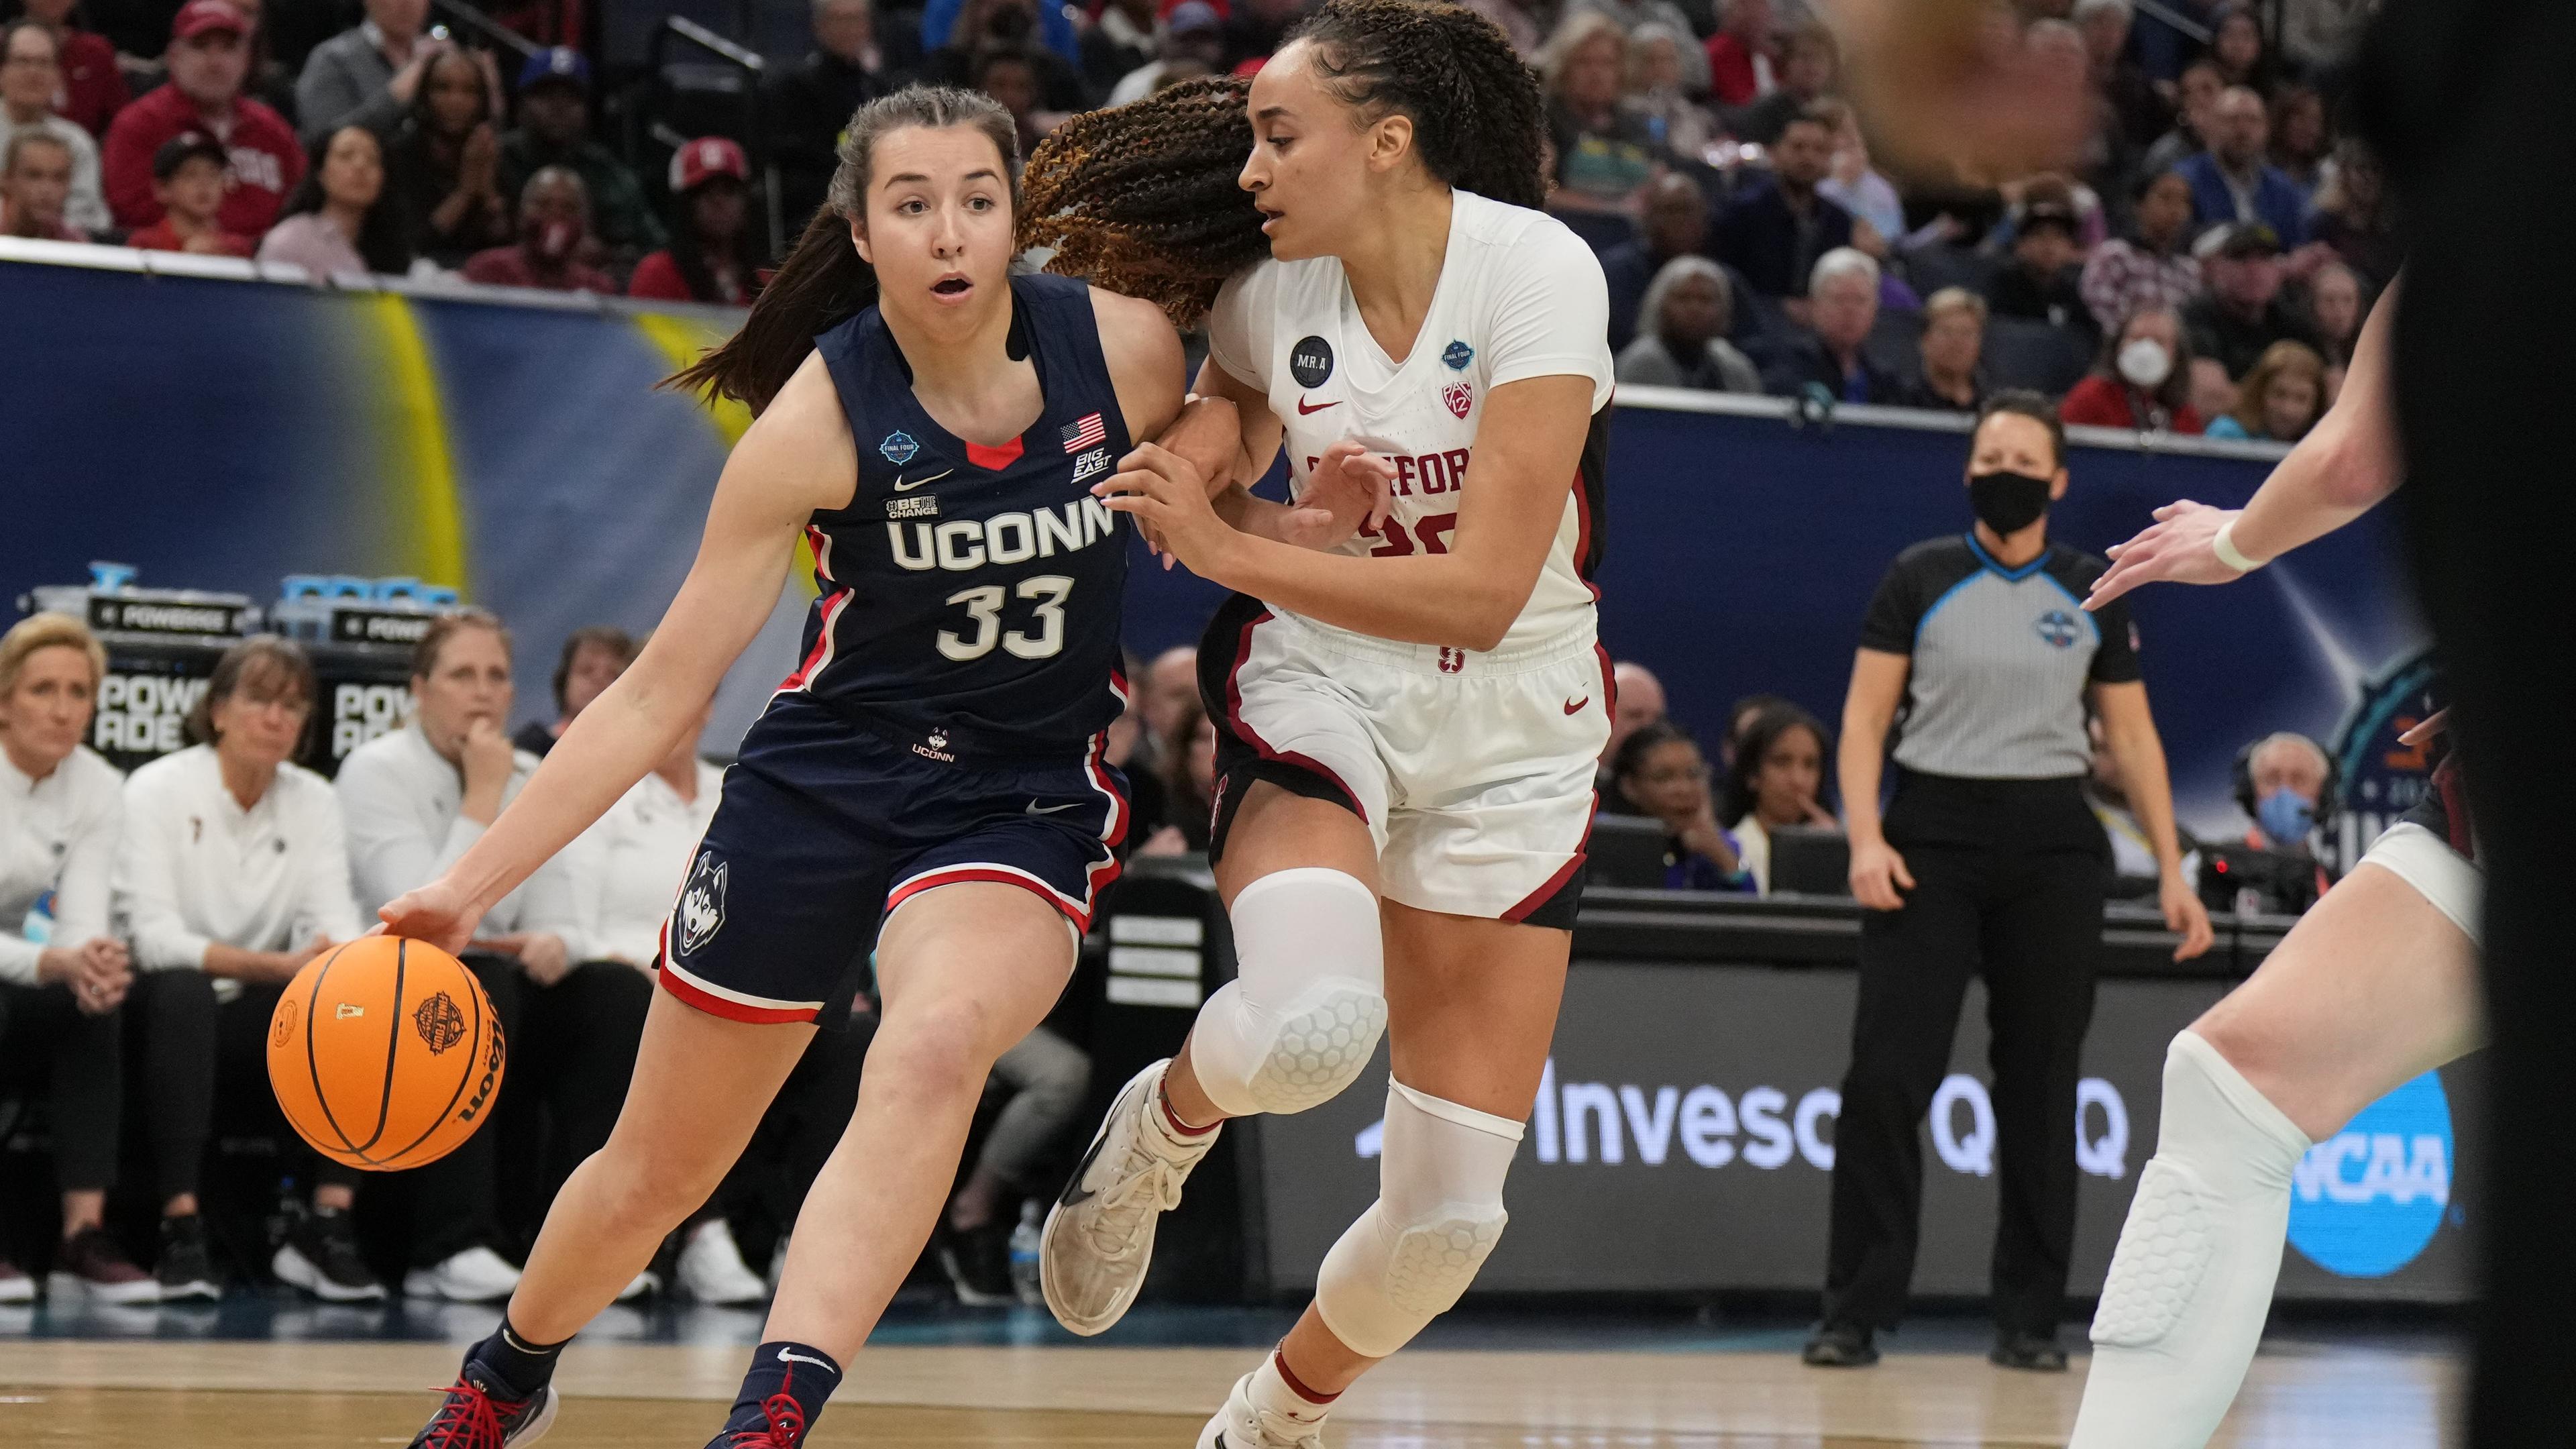 Apr 1, 2022; Minneapolis, MN, USA; UConn Huskies guard Caroline Ducharme (33) dribbles the ball as Stanford Cardinal guard Haley Jones (30) defends during the first half in the Final Four semifinals of the women's college basketball NCAA Tournament at Target Center. / Kirby Lee-USA TODAY Sports